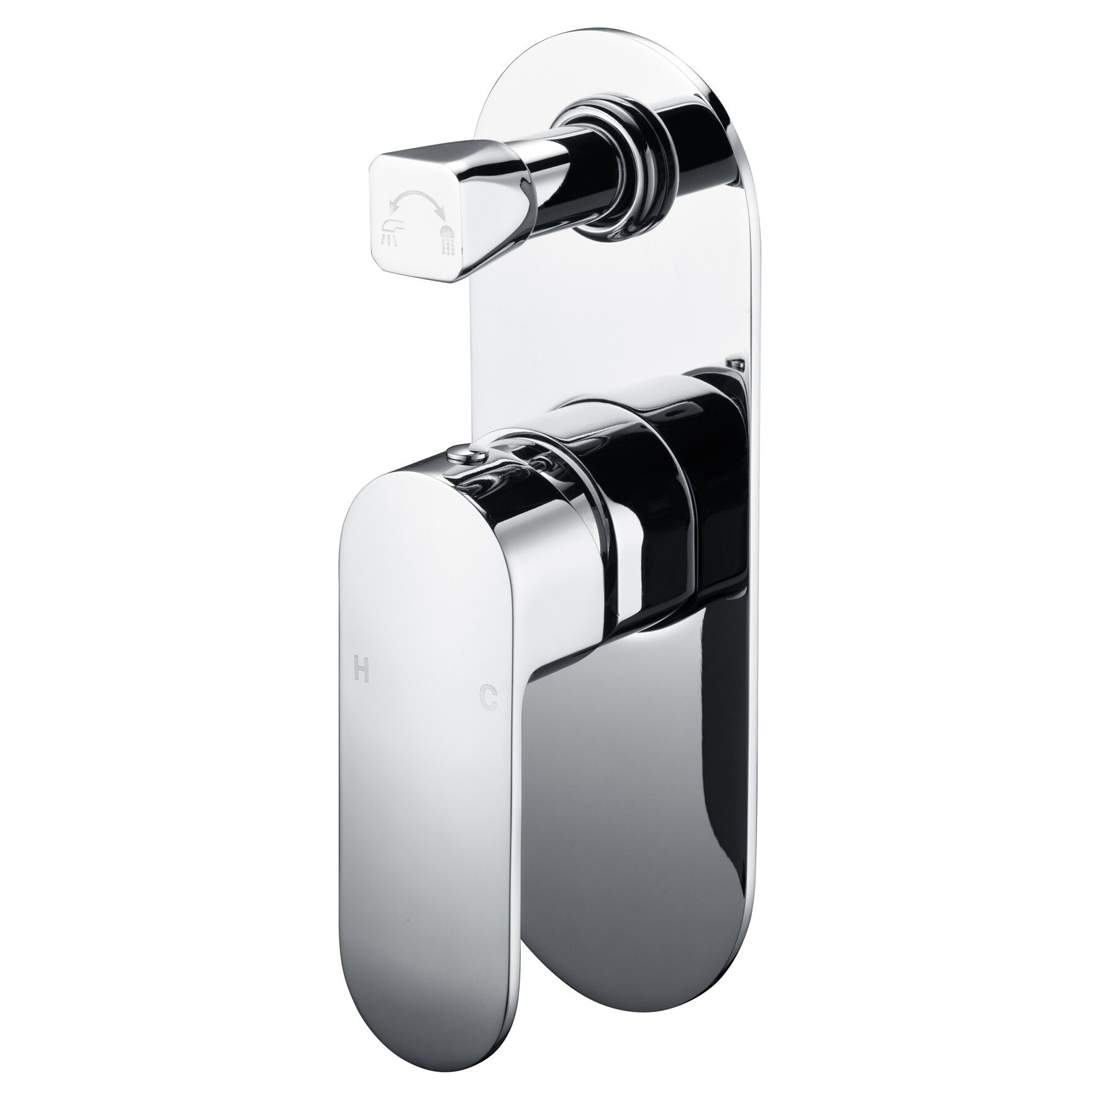 Quality MILAN Square Bathroom Shower Bath Wall Flick Mixer Tap with Diverter 